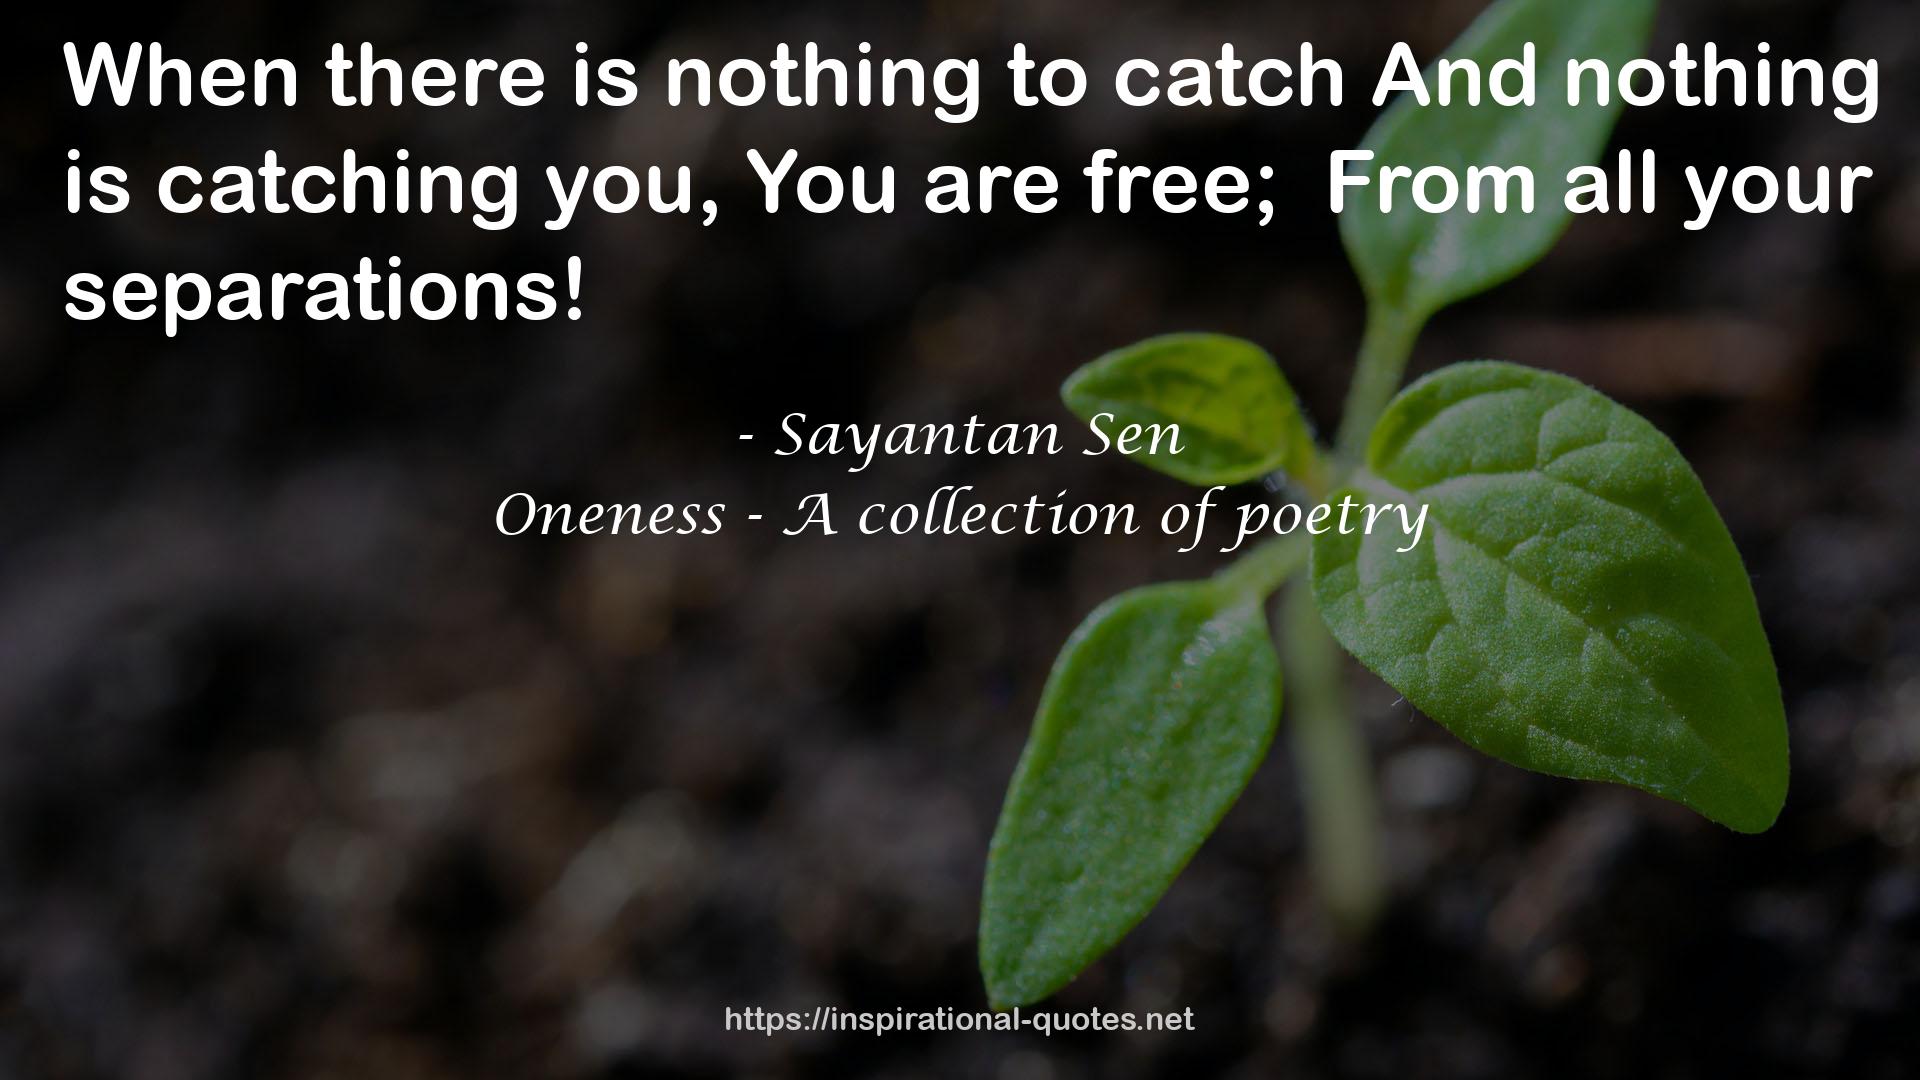 Oneness - A collection of poetry QUOTES